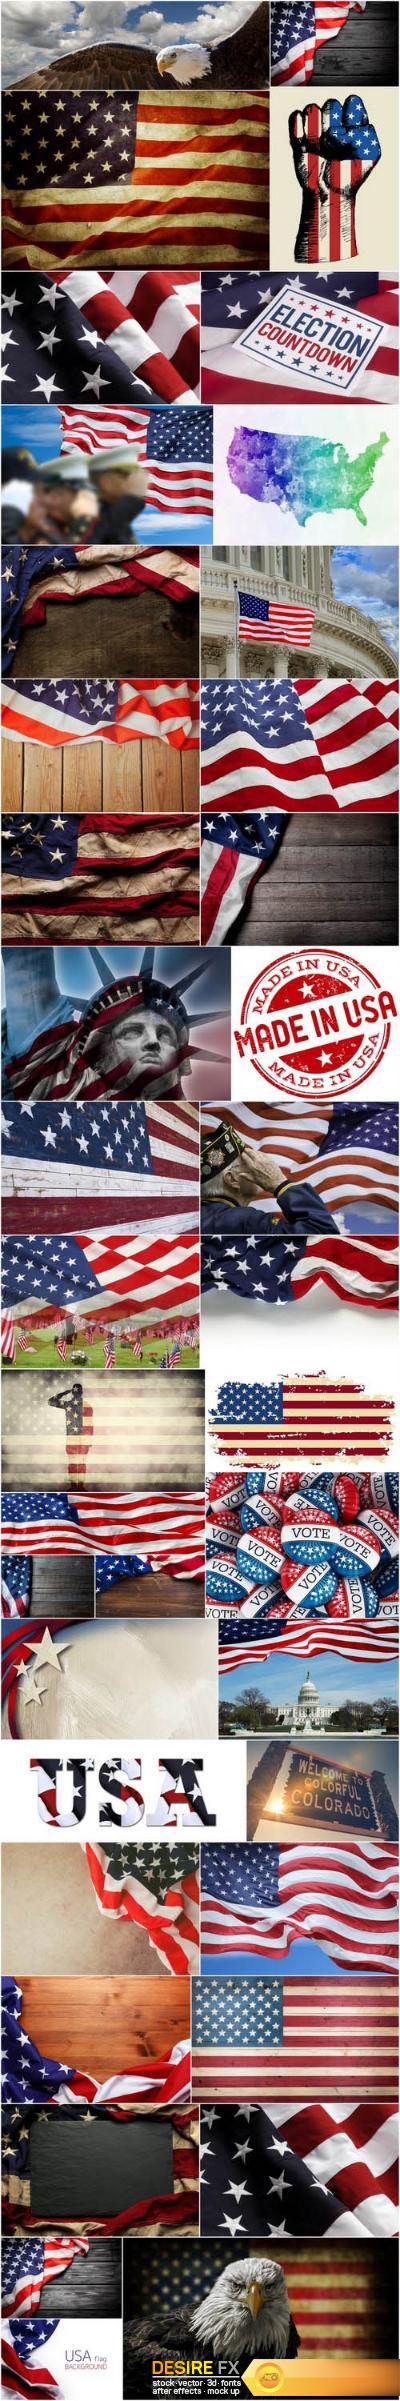 U.S. Style - American Patriot, Set of 39xUHQ JPEG Professional Stock Images